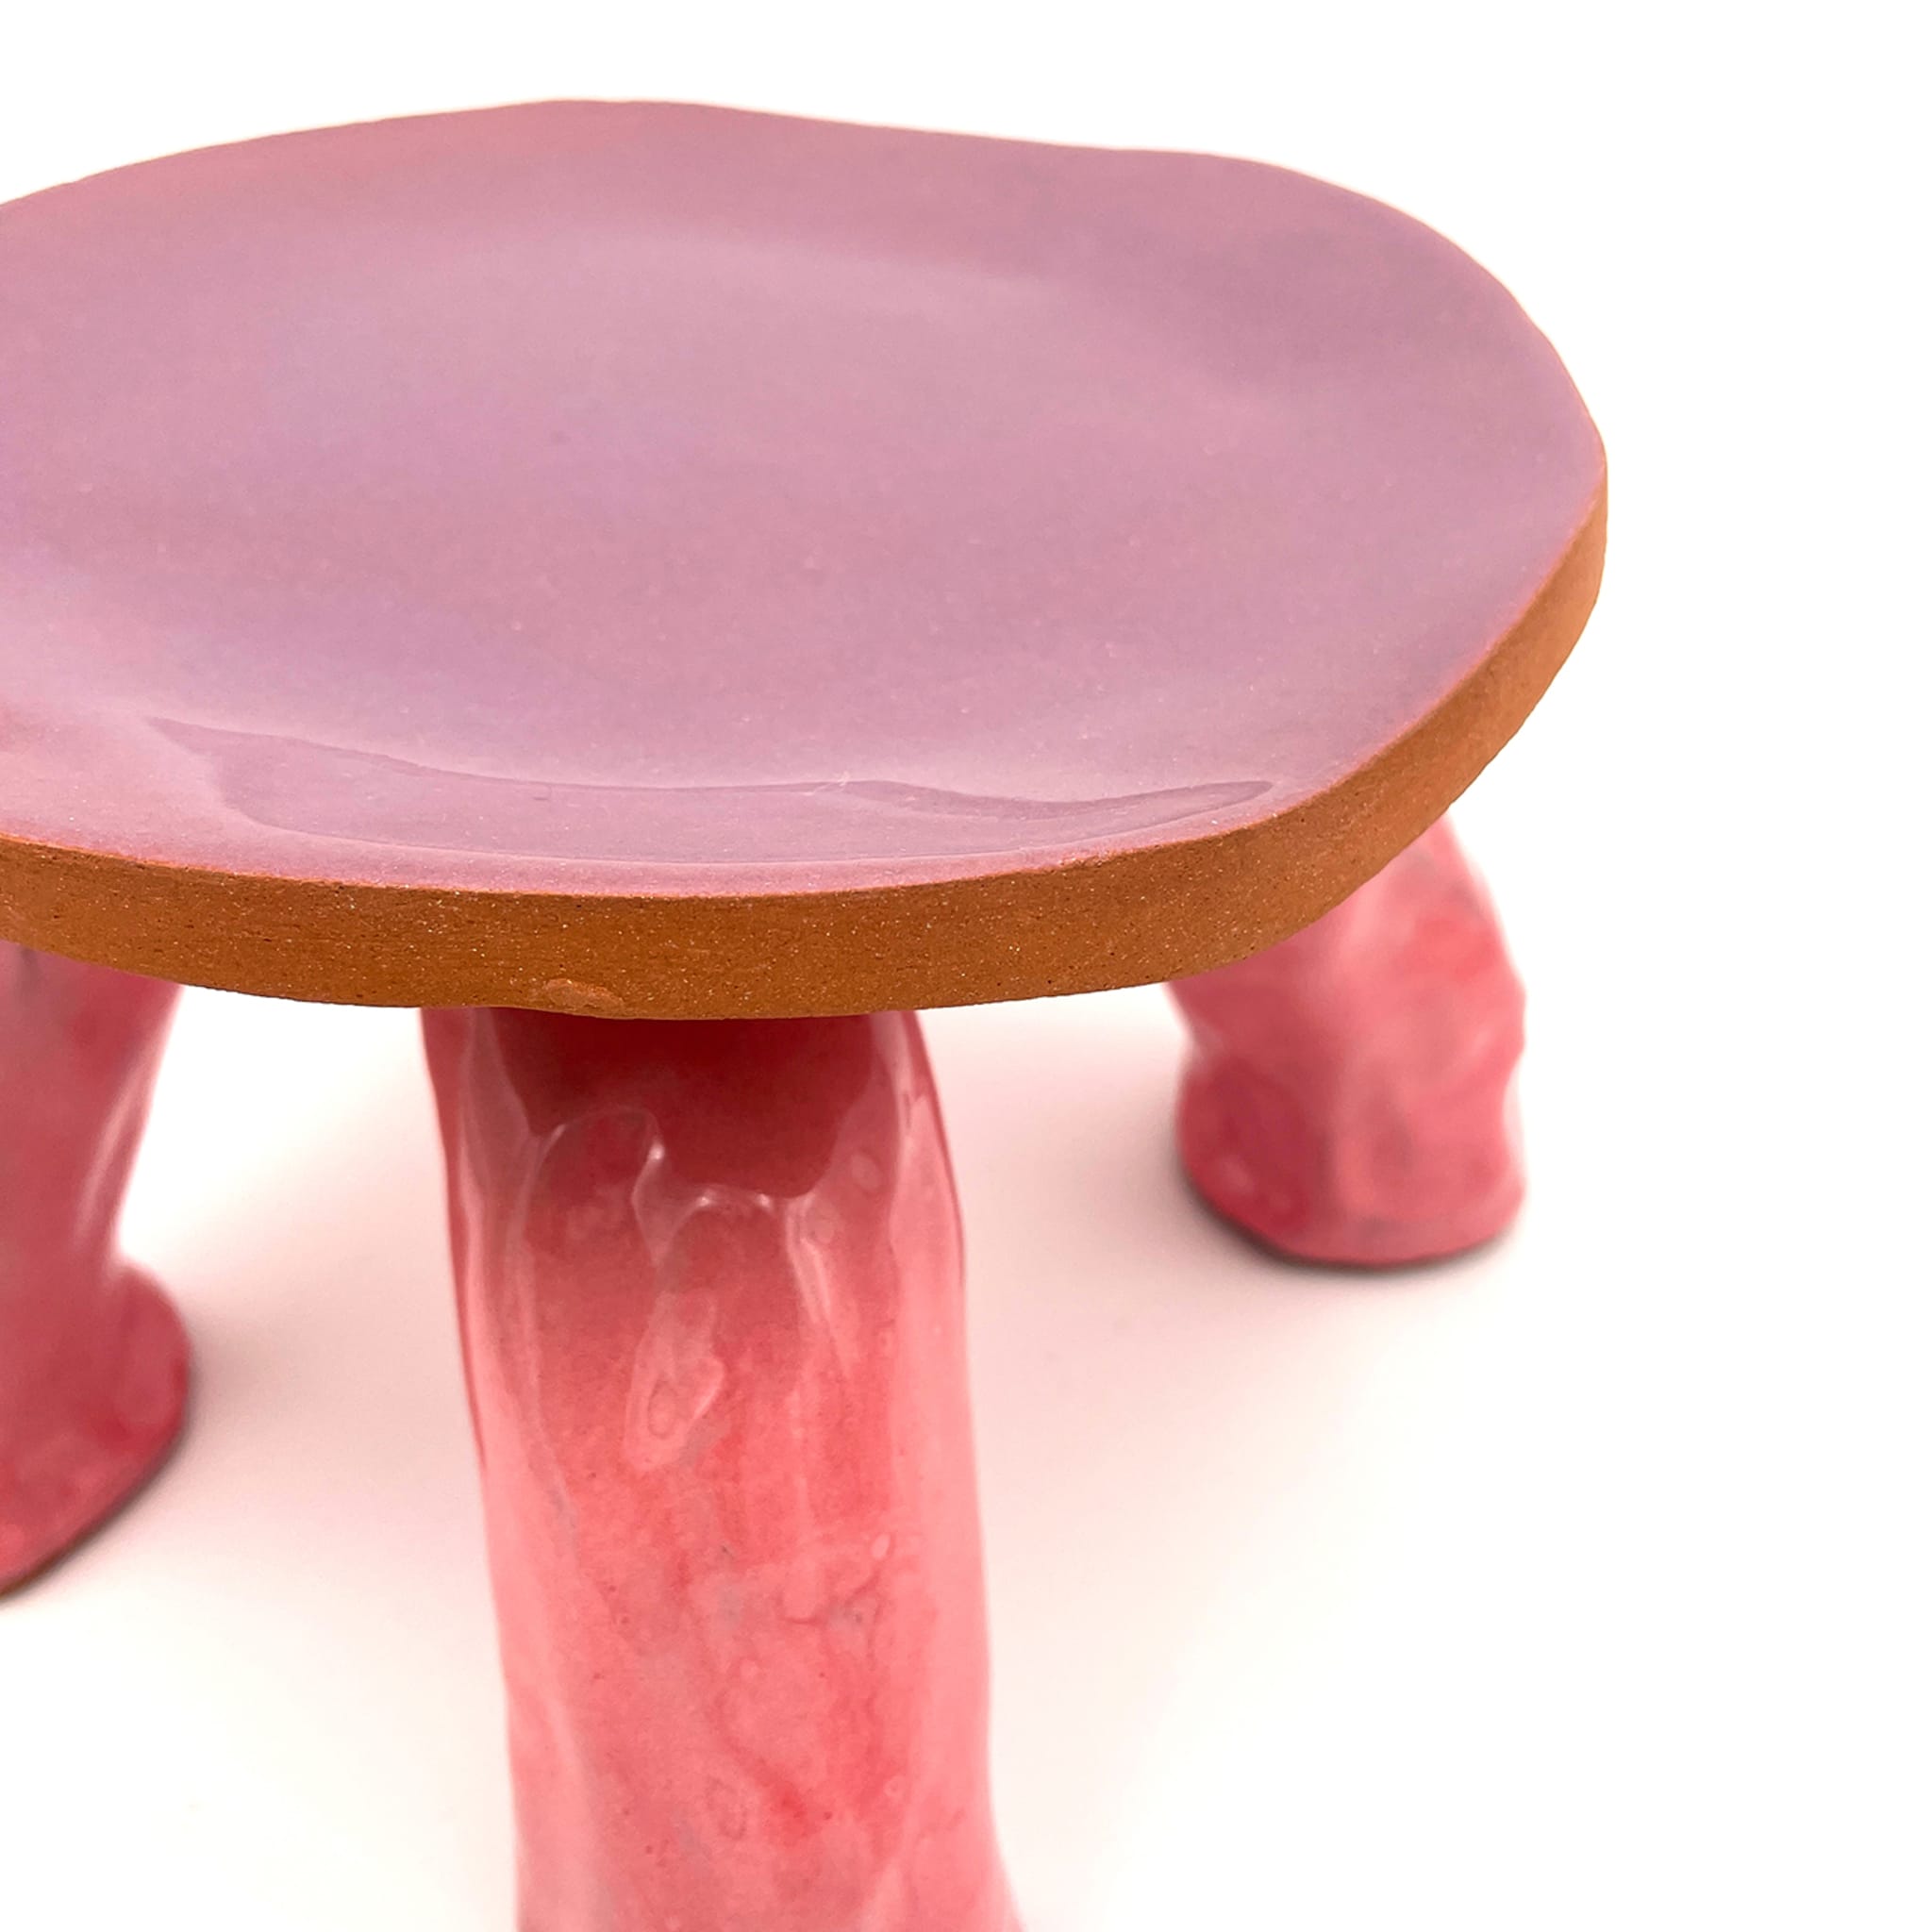 Fungo 4-legged Pink and Lilac Cake Stand - Alternative view 2